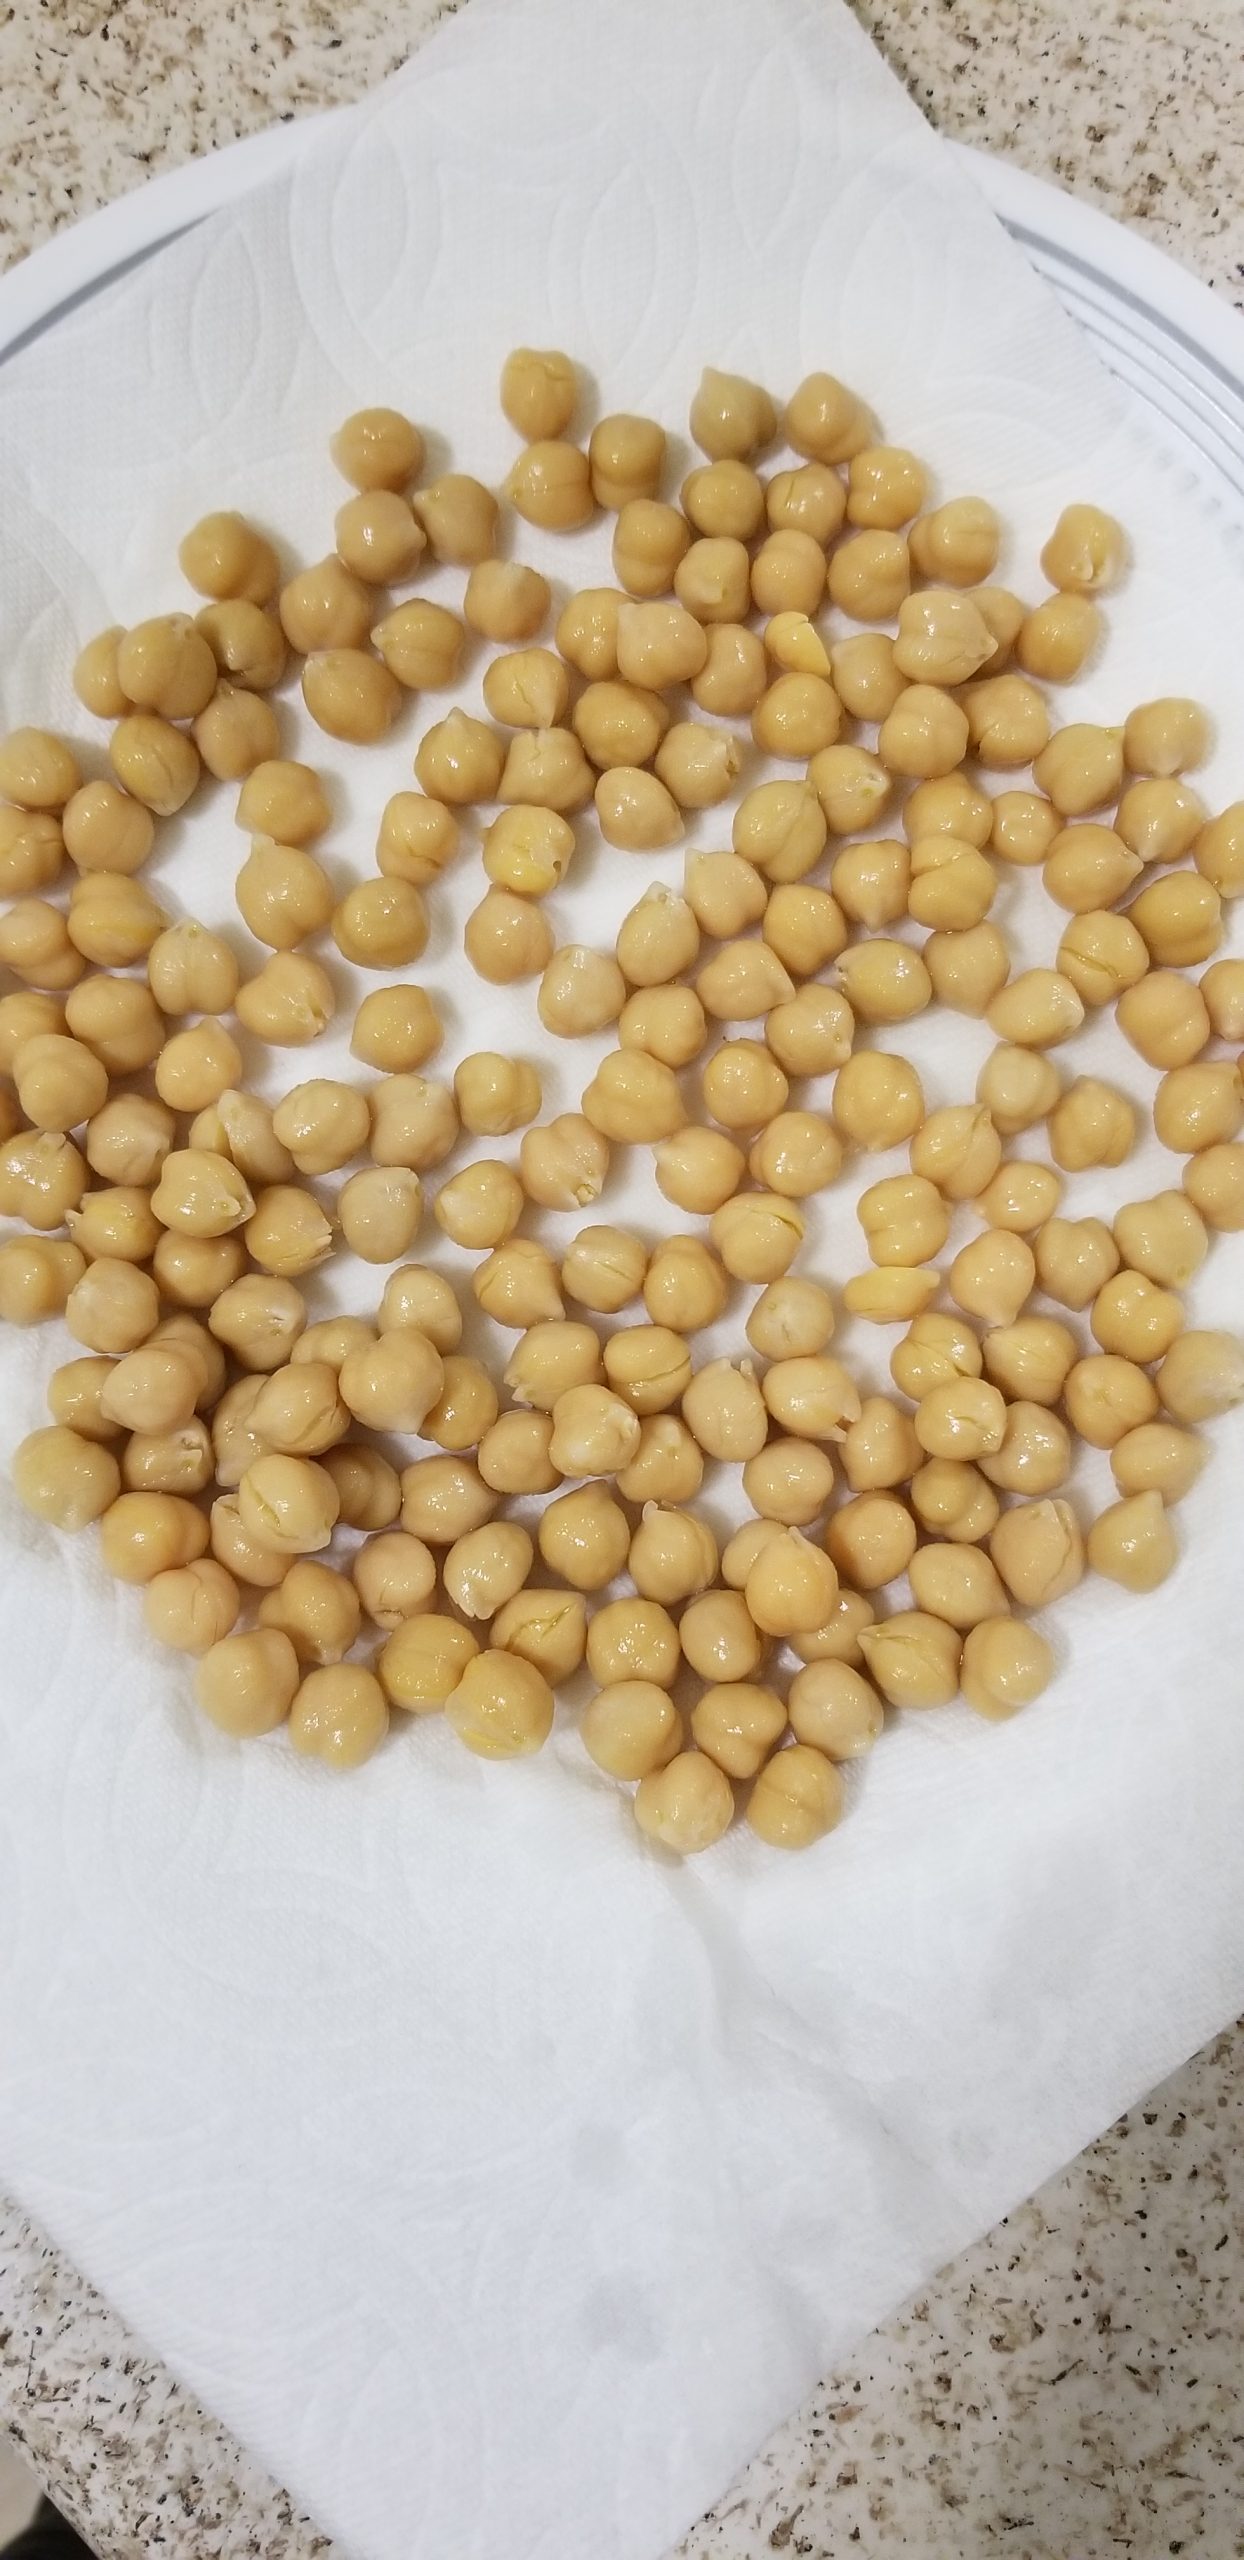 Chickpeas on a plate lined with paper towel